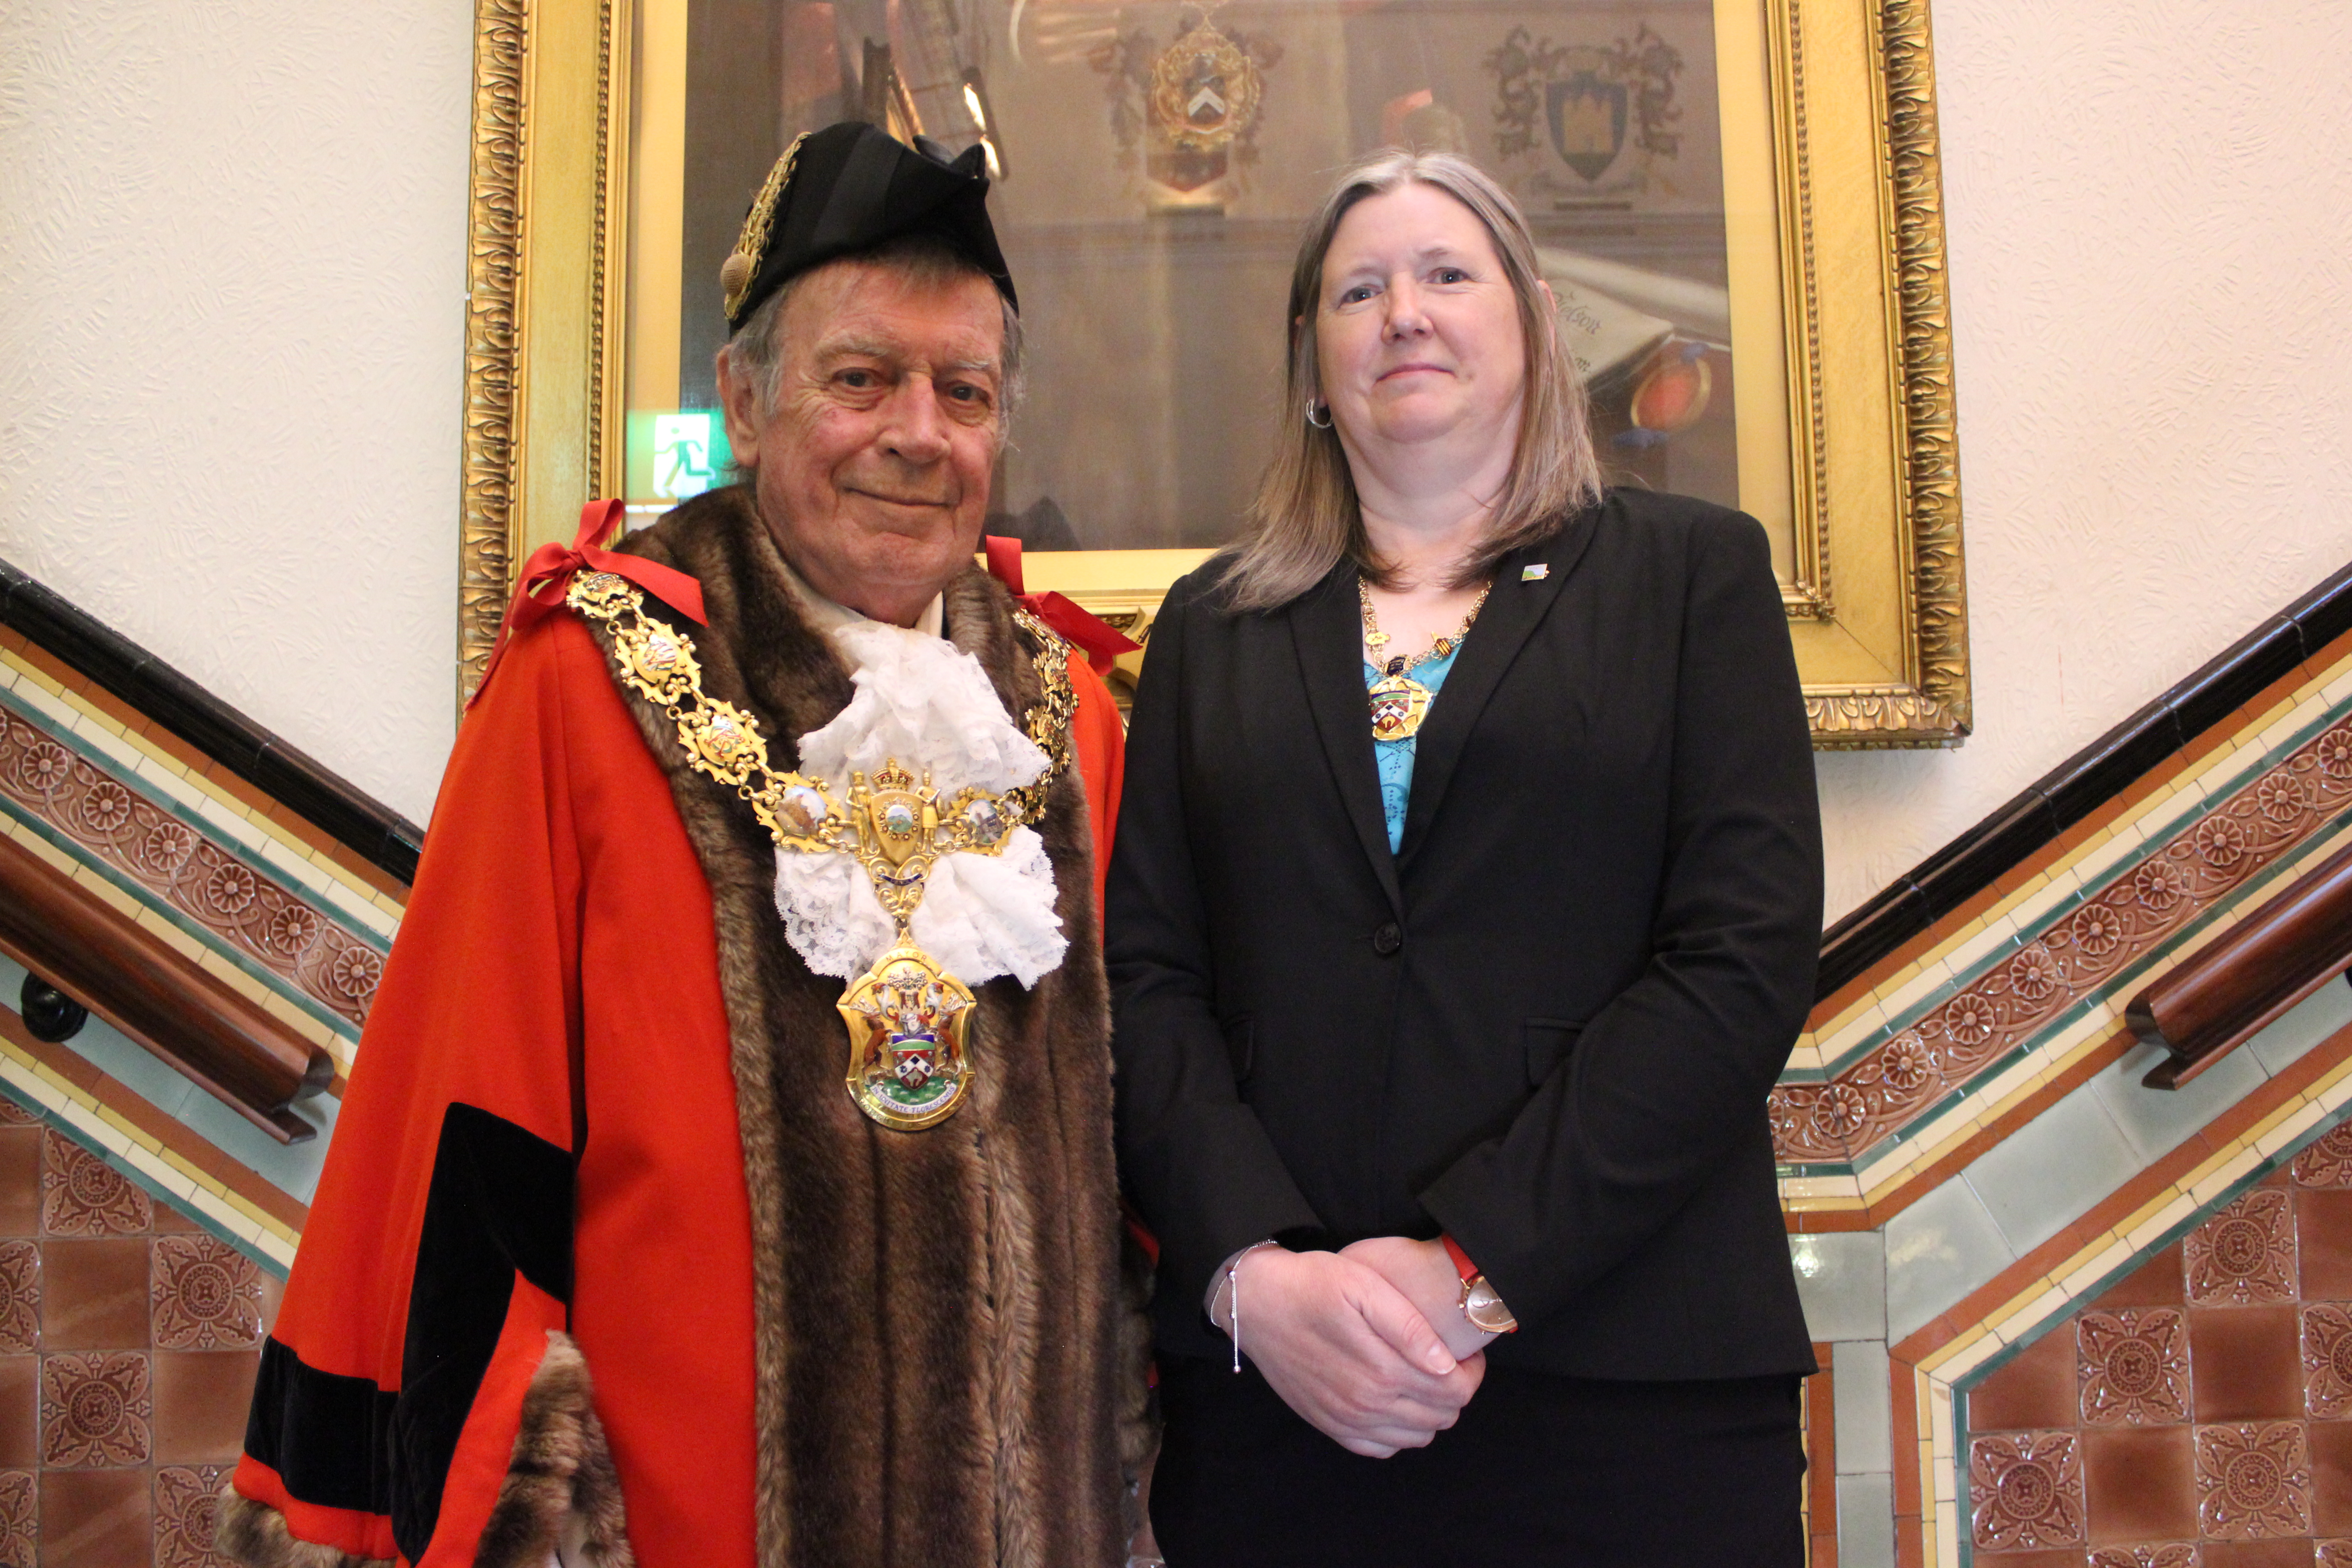 The Mayor of Pendle invites you to see inside Nelson Town Hall